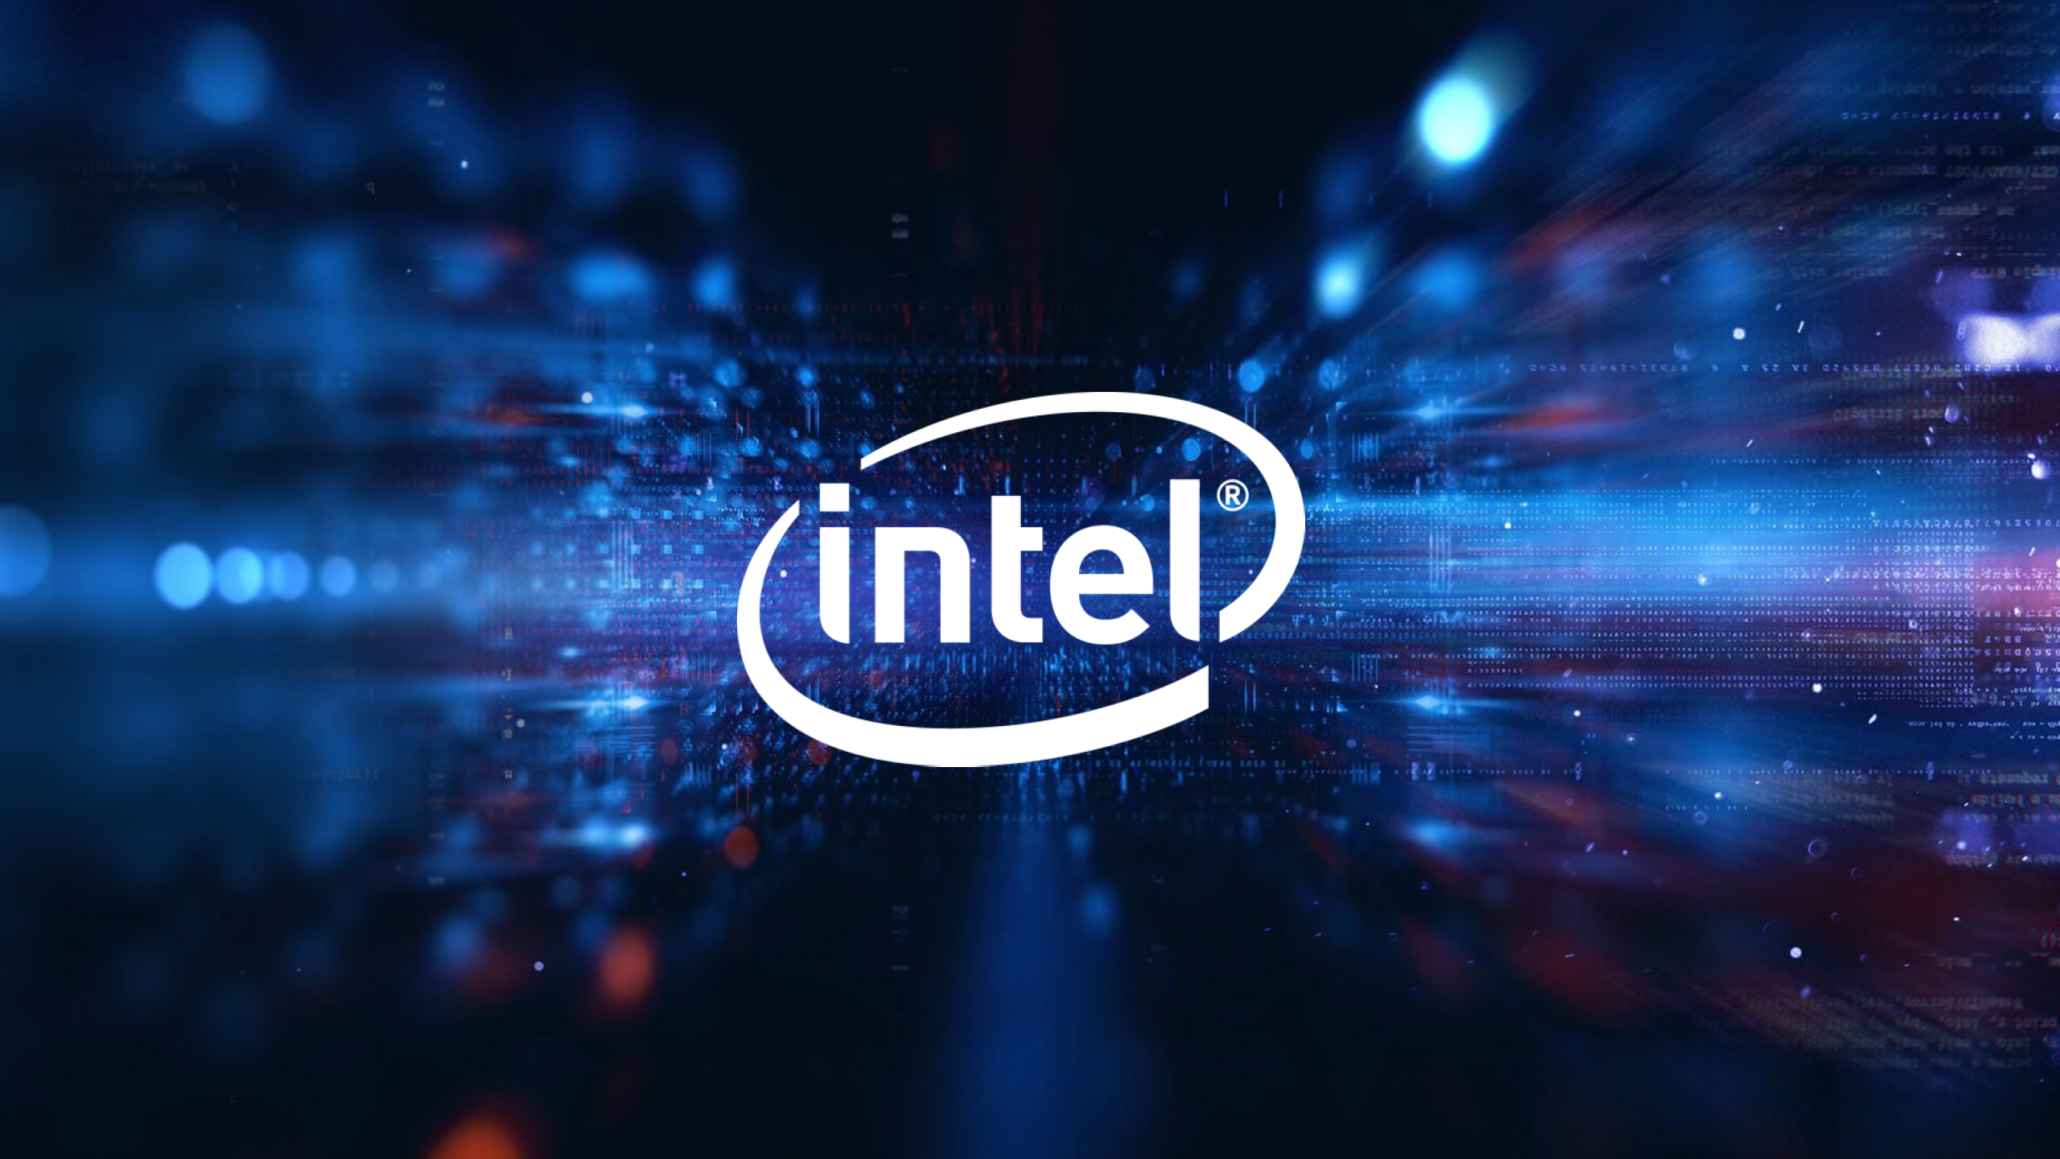 Intel sells their NAND memory chip business for $9 billion